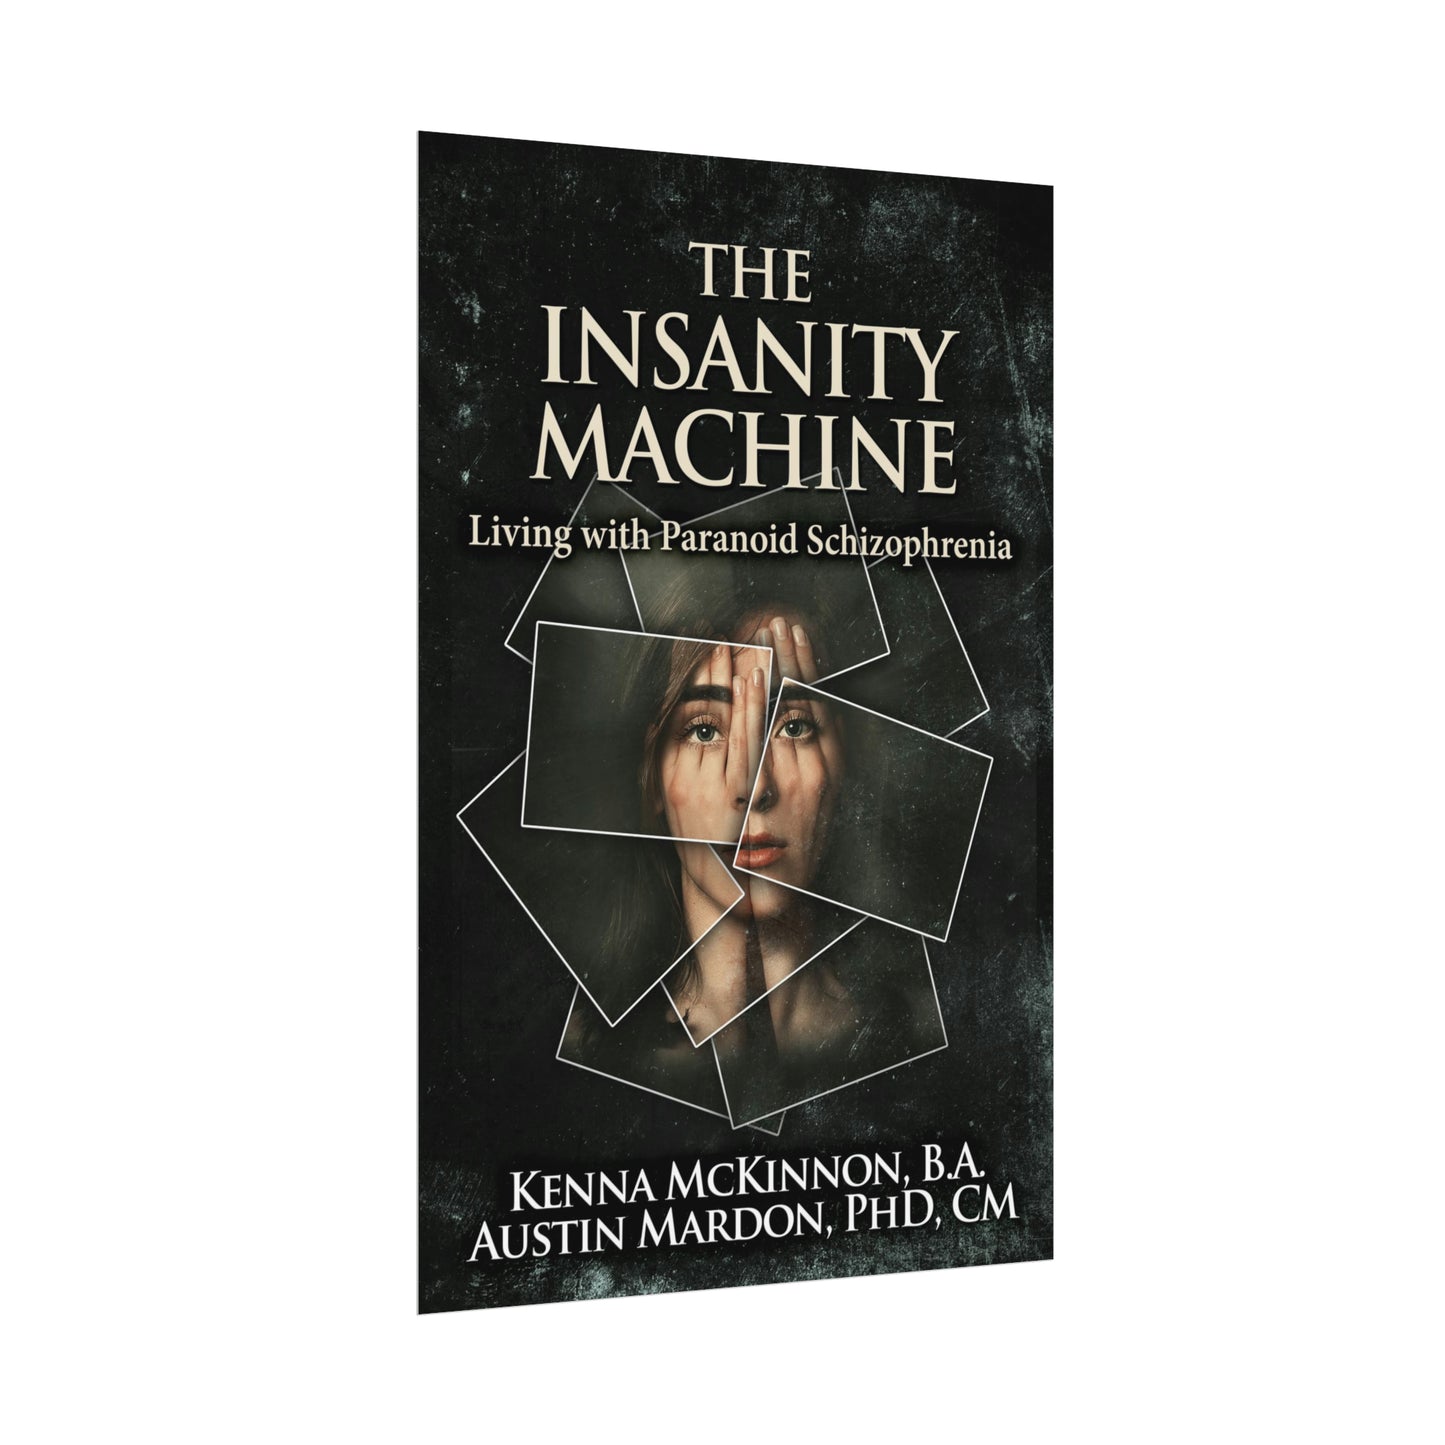 The Insanity Machine - Life with Paranoid Schizophrenia - Rolled Poster